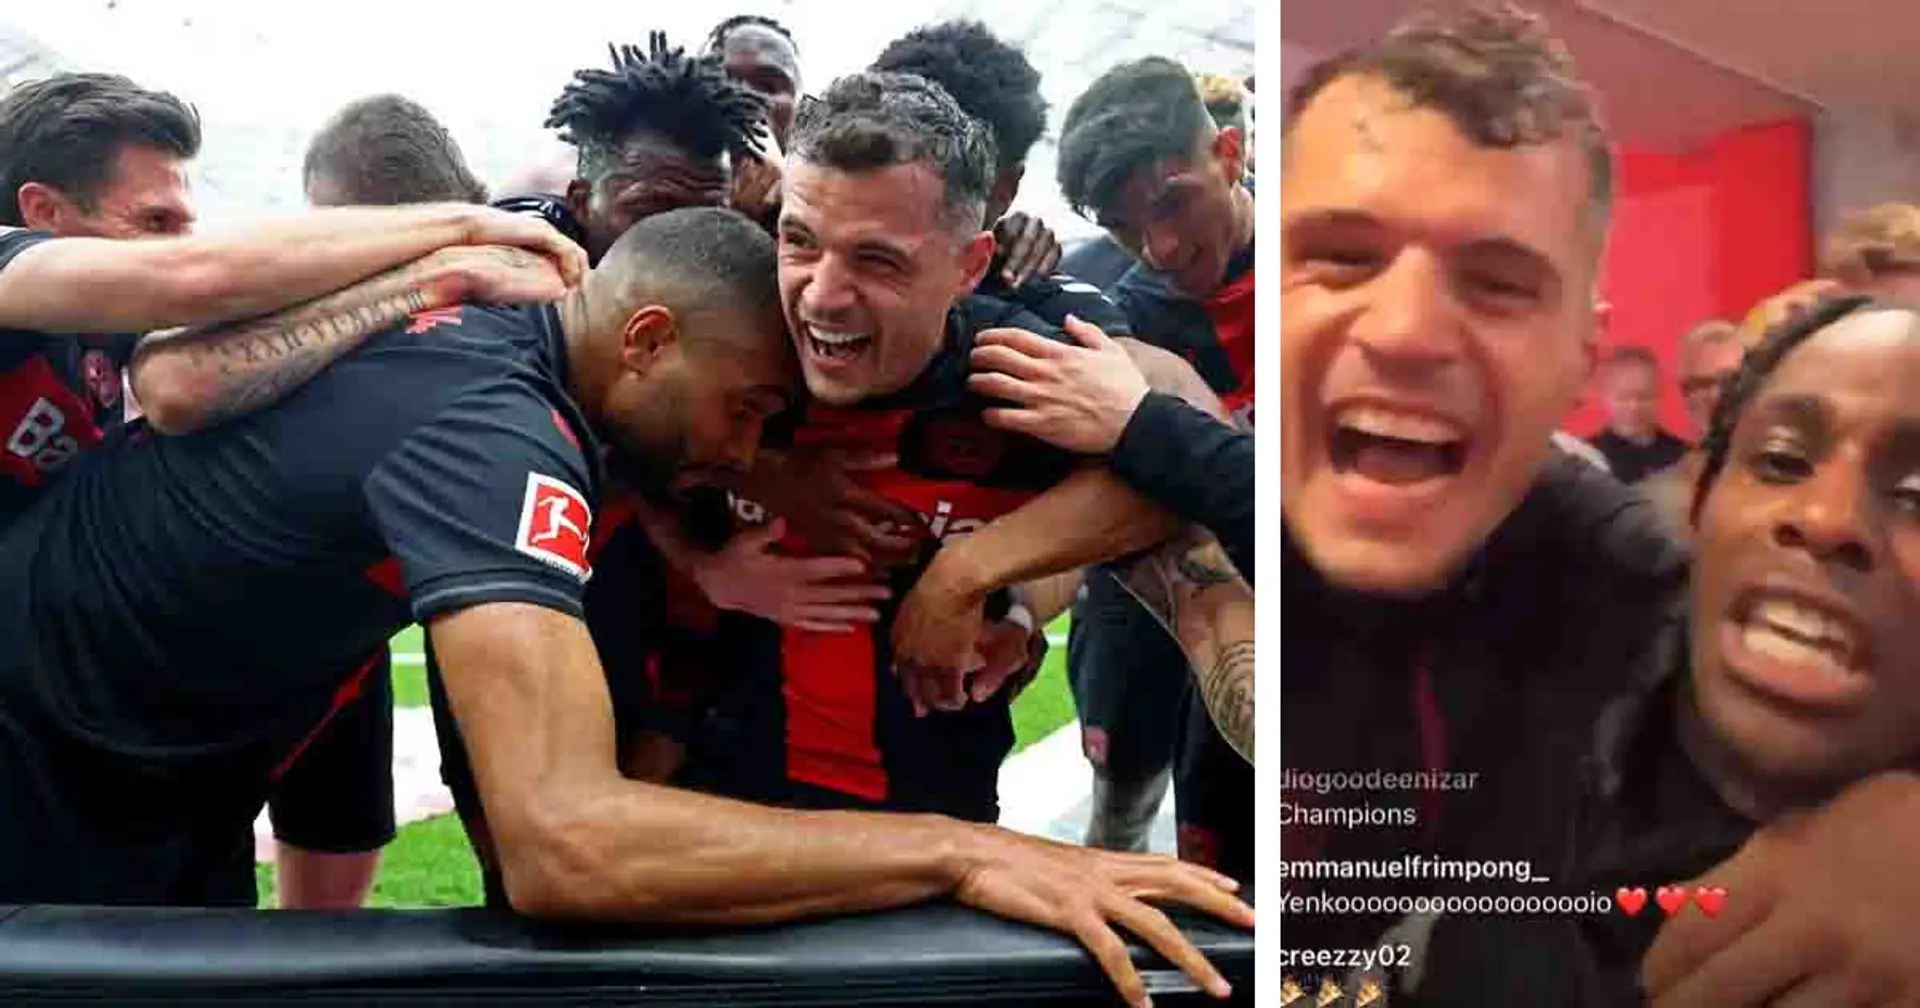 Bayer Leverkusen man Frimpong to Xhaka: 'You came from Arsenal and won league title here’